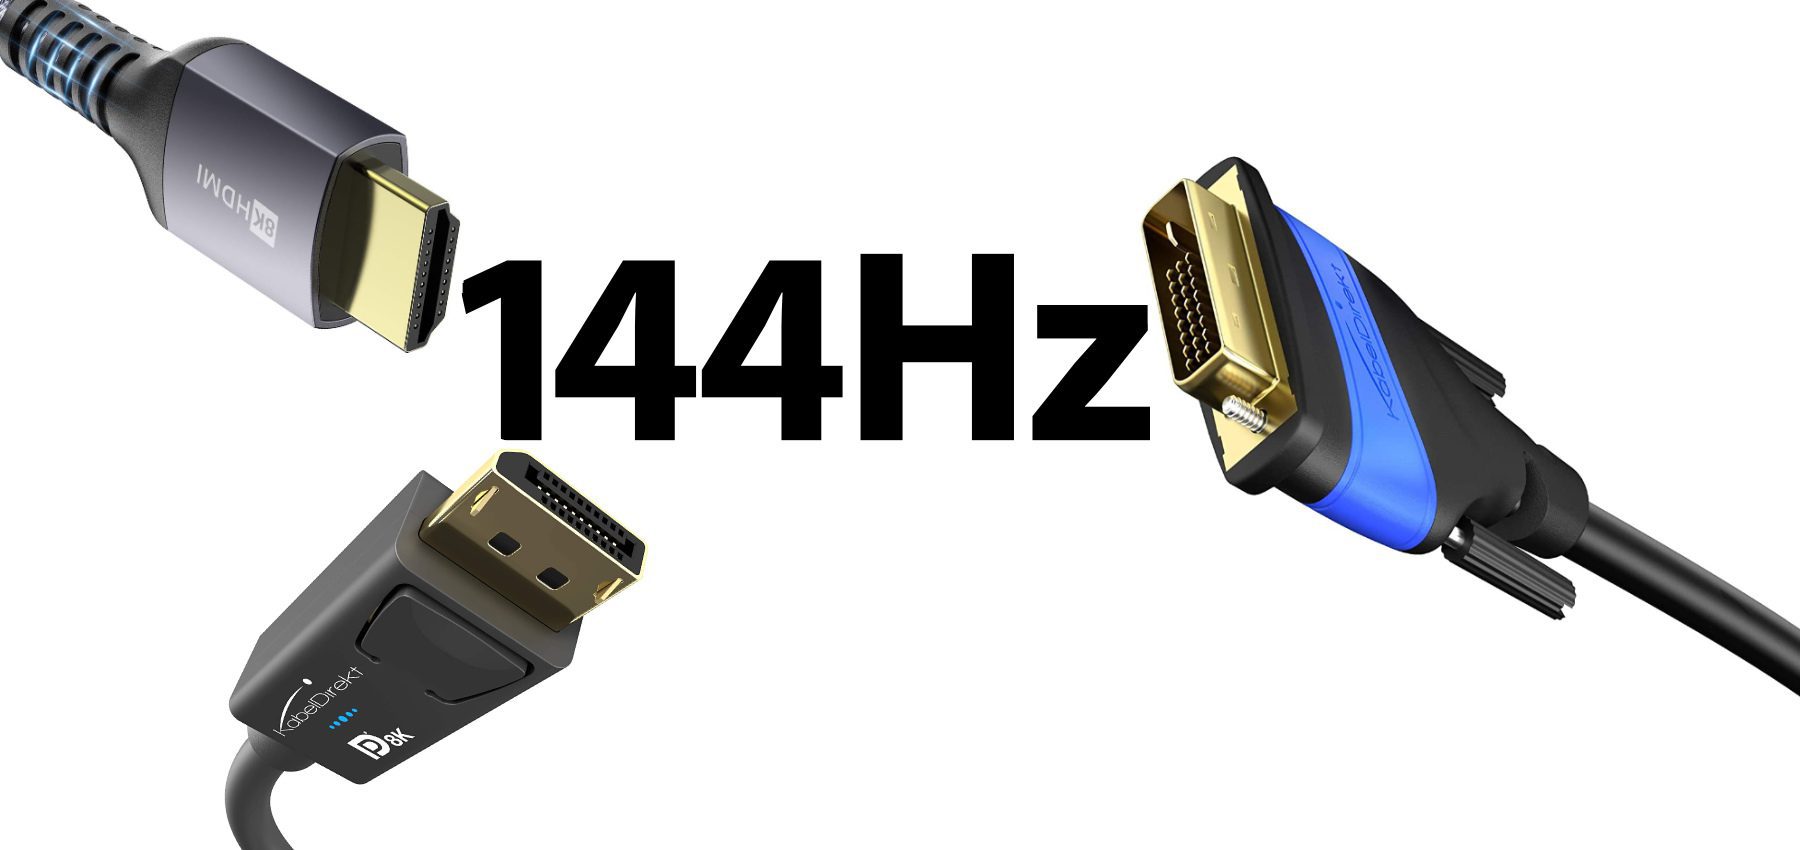 Which cable do you need for a 144Hz monitor? “Sir Apfelot